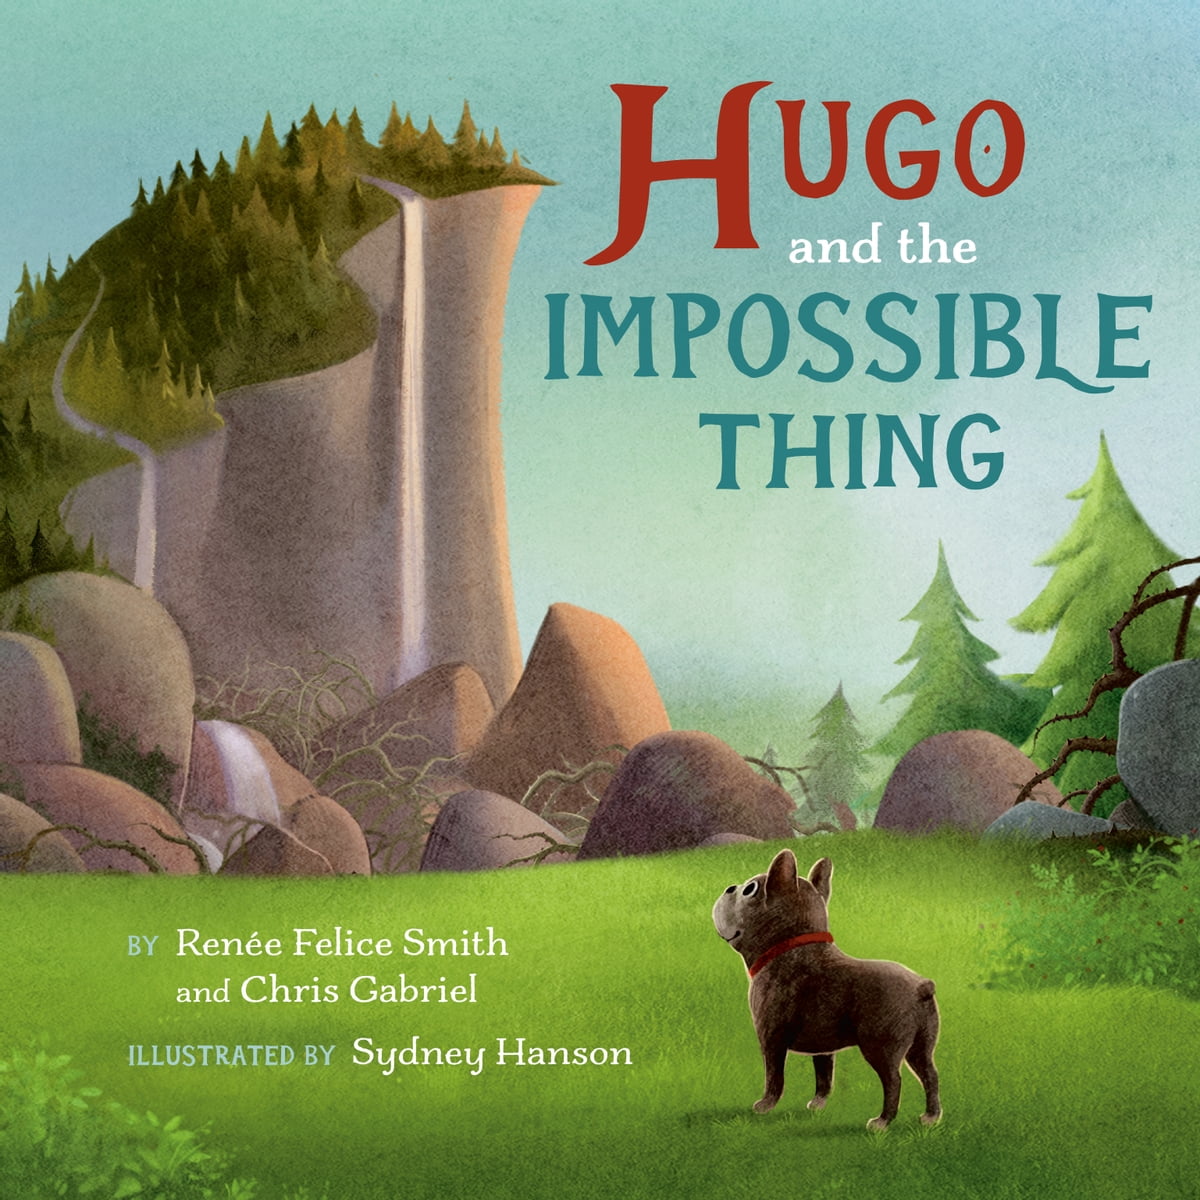 book cover for "Hugo and the Impossible Thing"